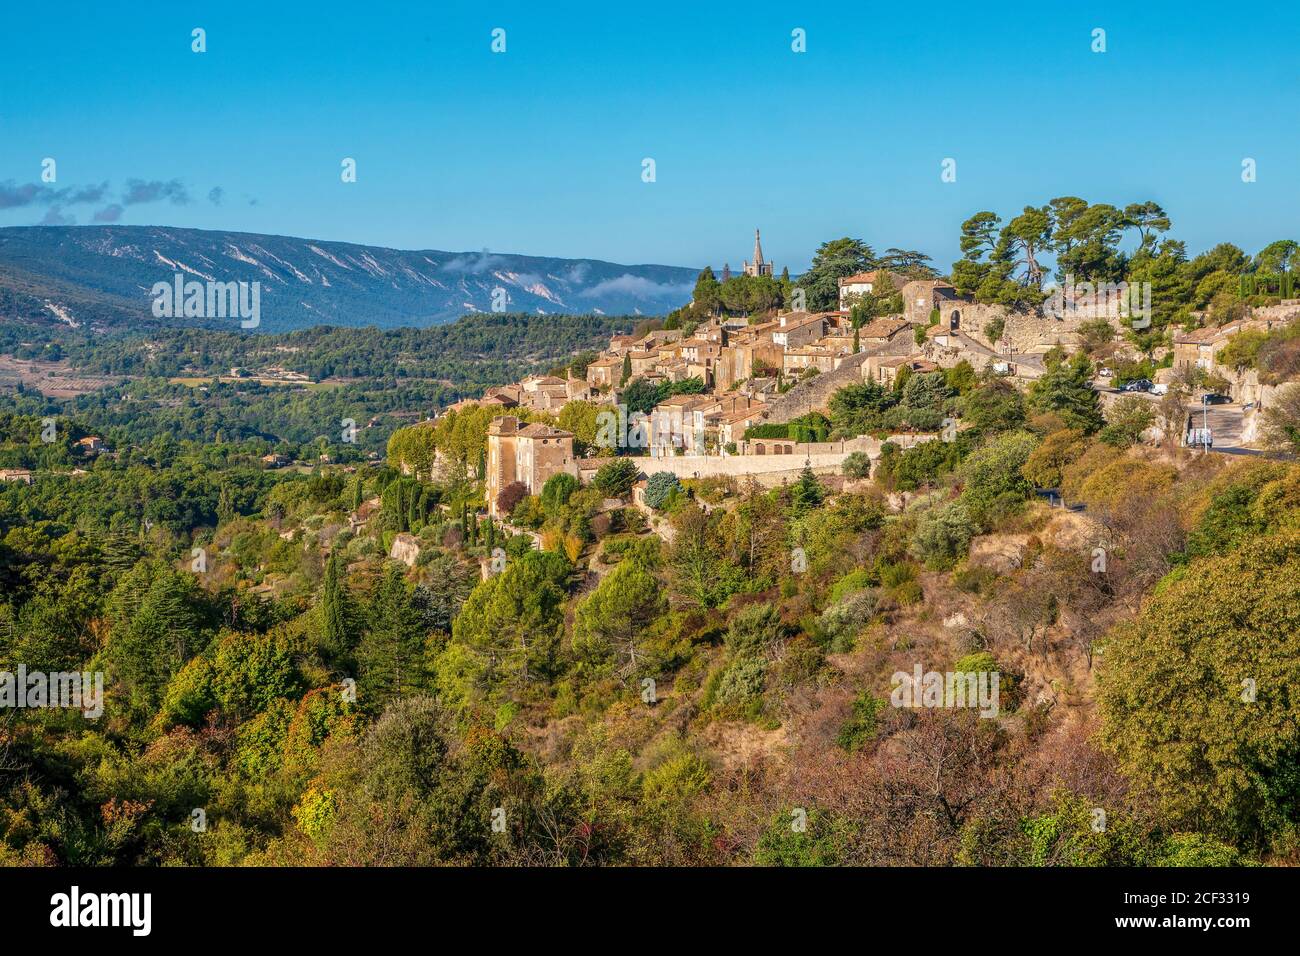 The picturesque village of Bonnieux in autumn, set in the French countryside in the Luberon region of Provence. Stock Photo